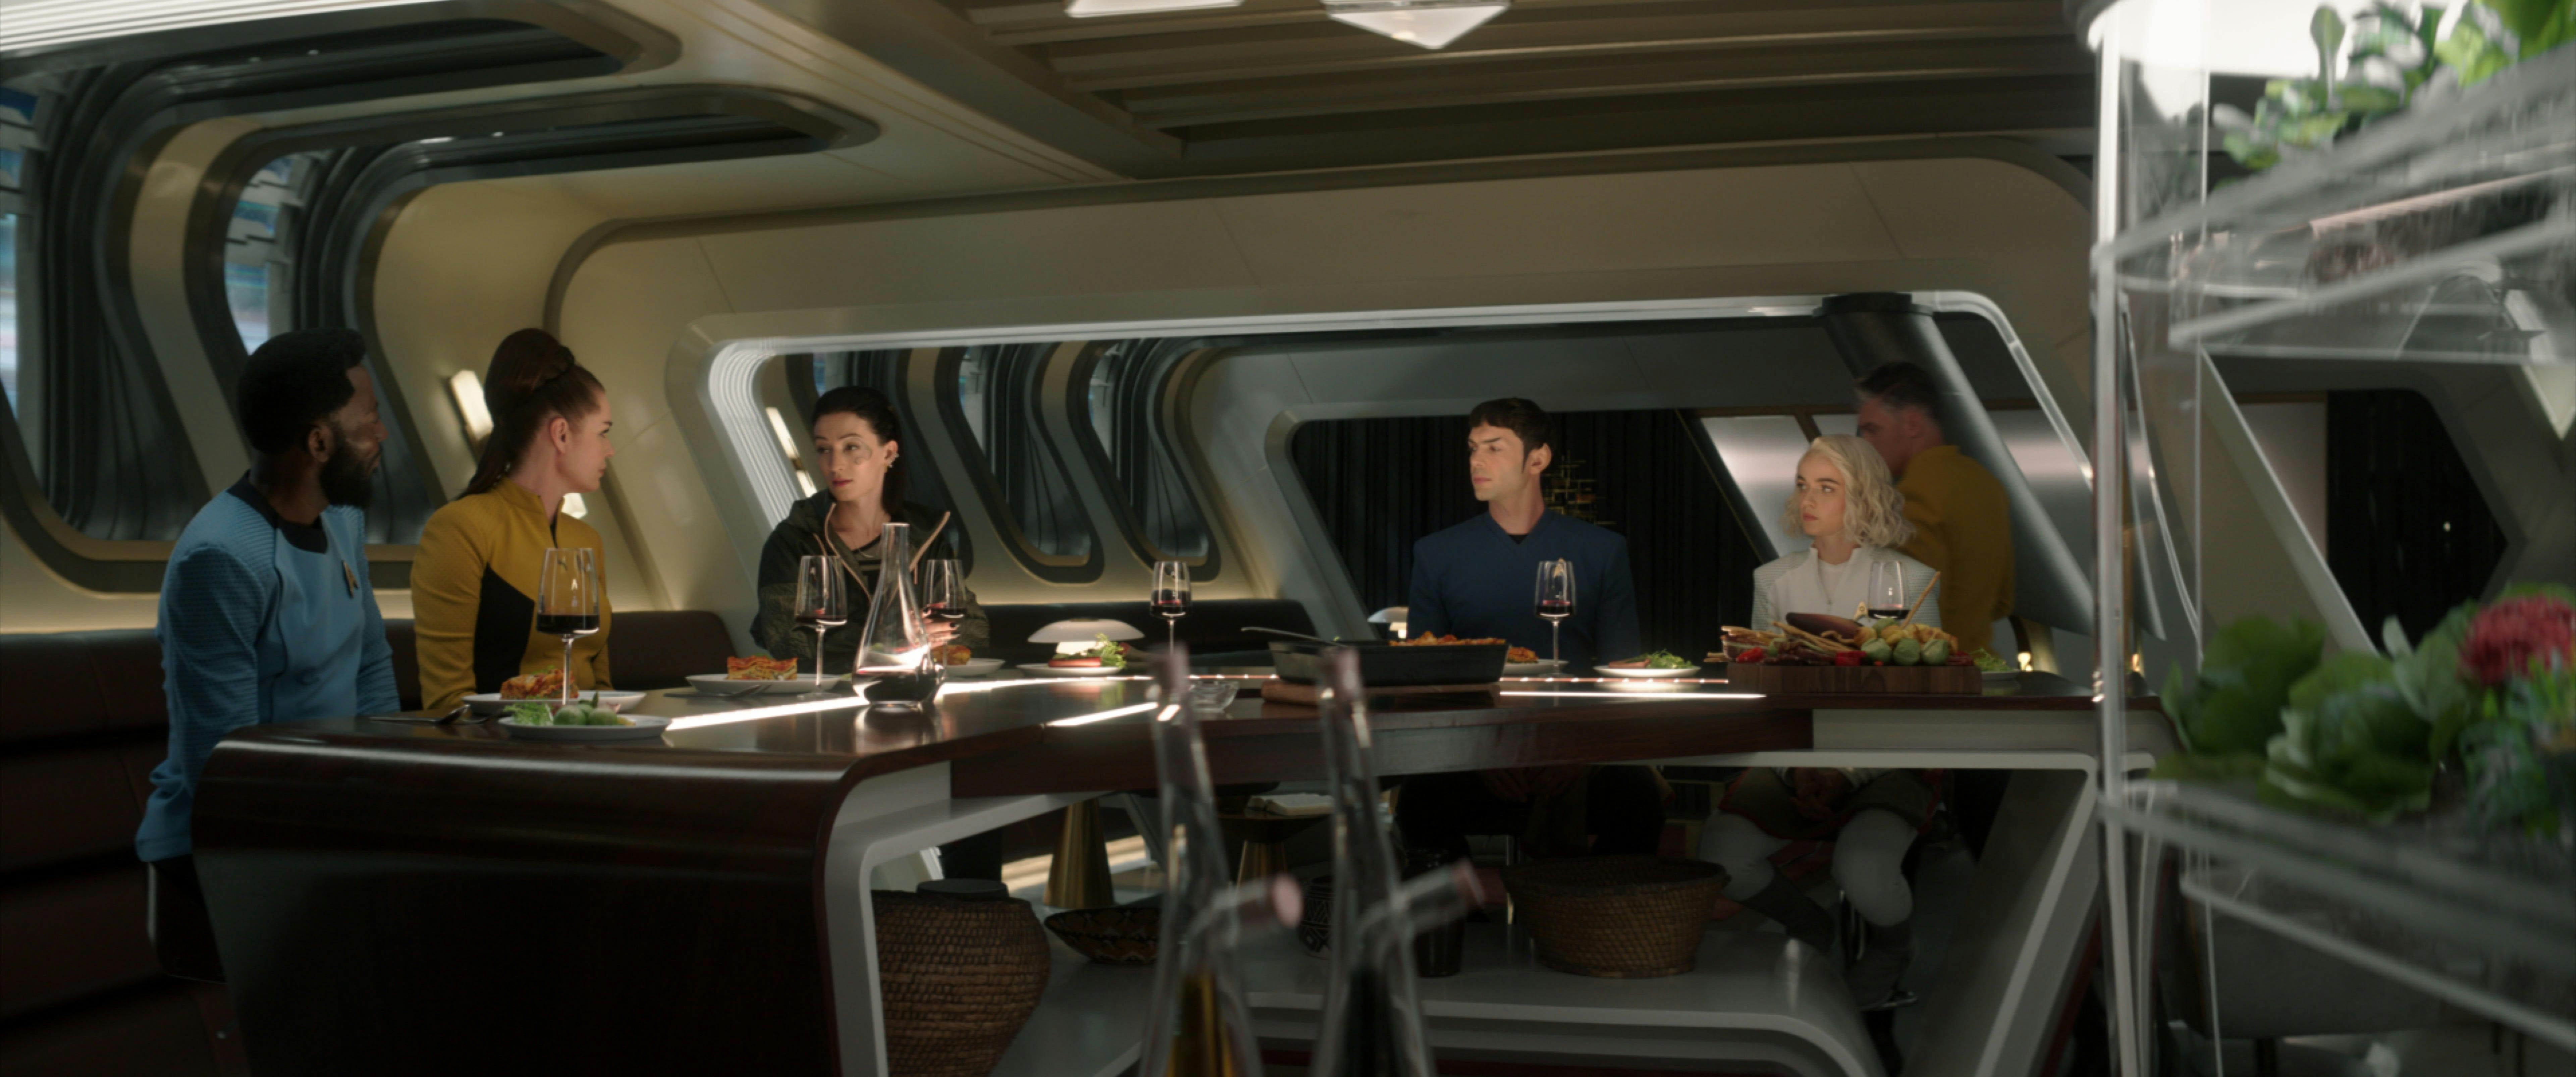 The crew of the U.S.S. Enterprise sits around a table in Pike's quarters